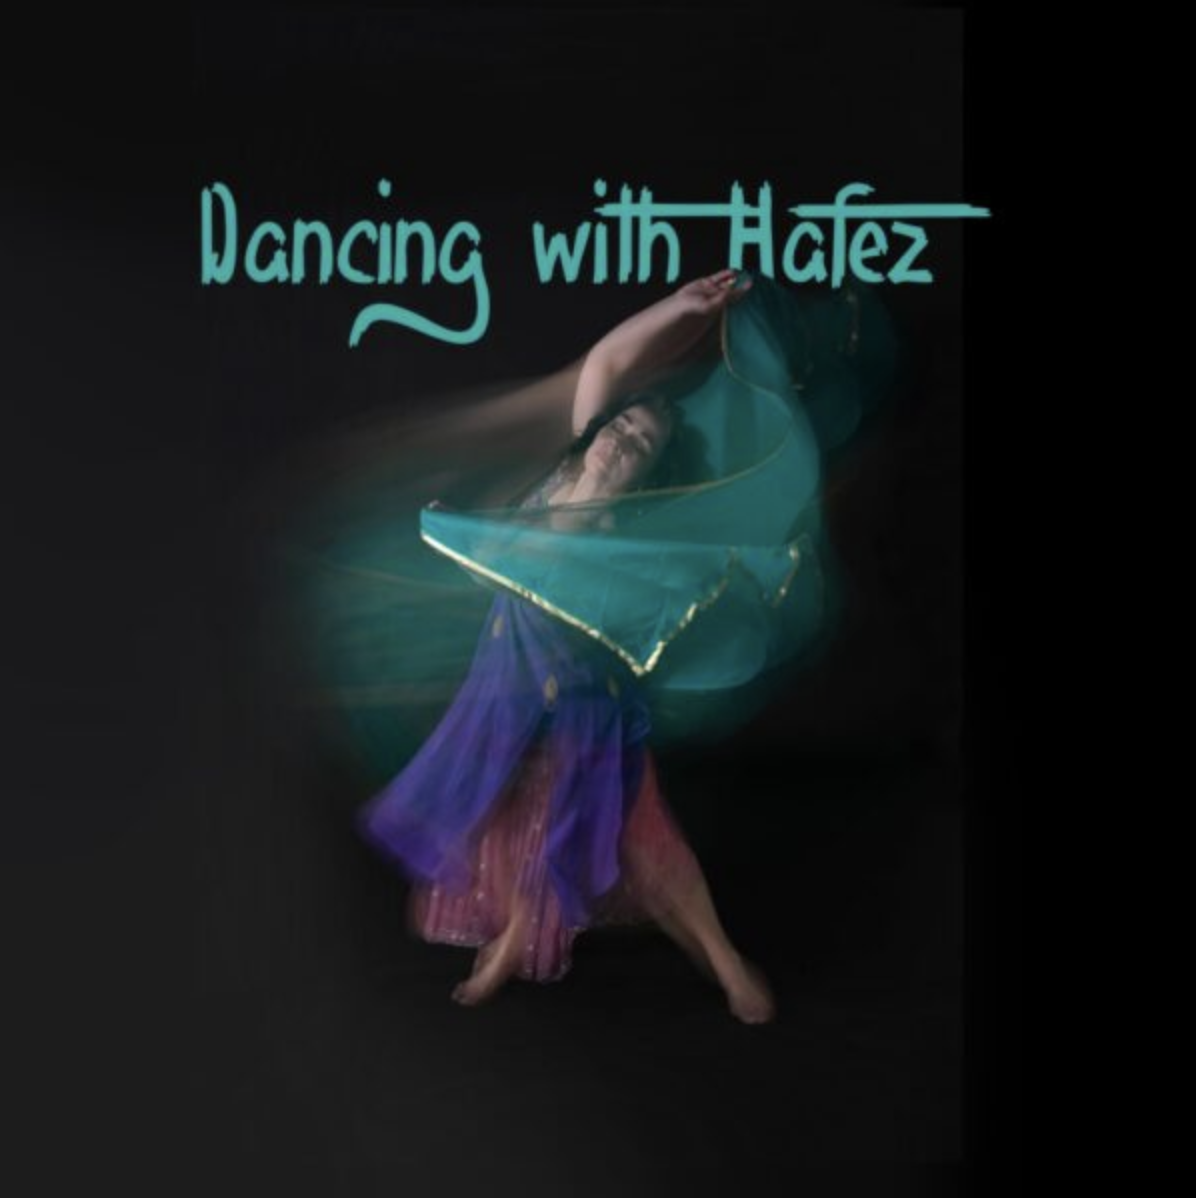 The dancer is wearing a purple and pink dress and dancing with a turquoise veil